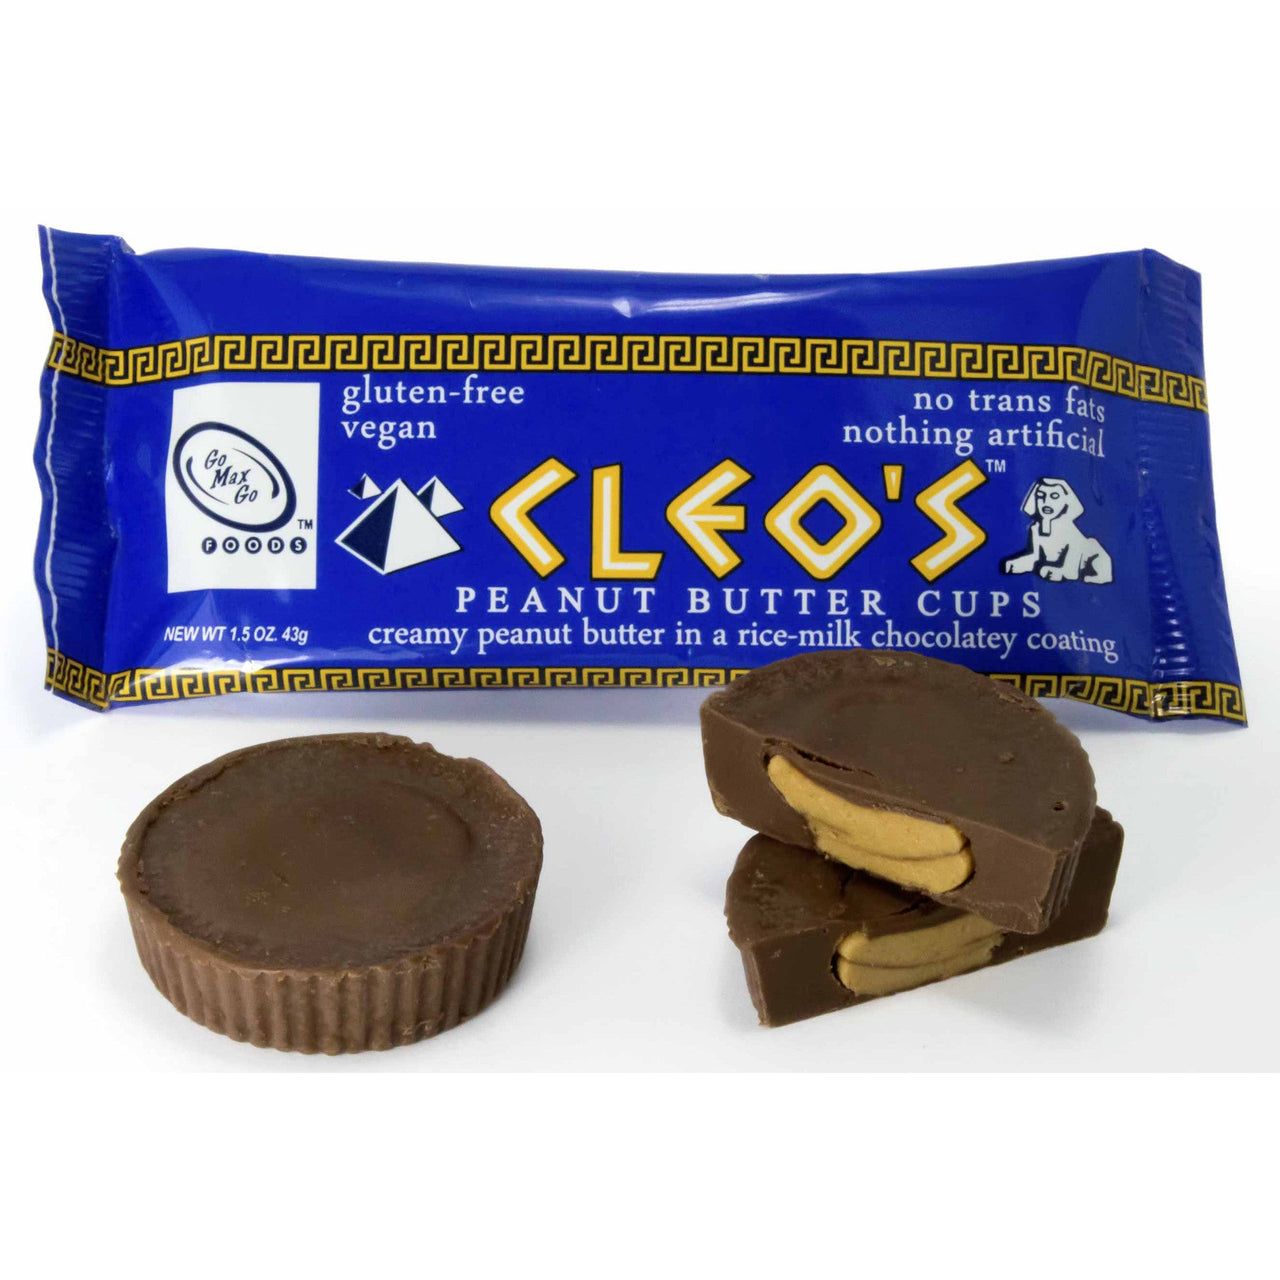 Cleo's Vegan Peanut Butter Cups (Reese's)